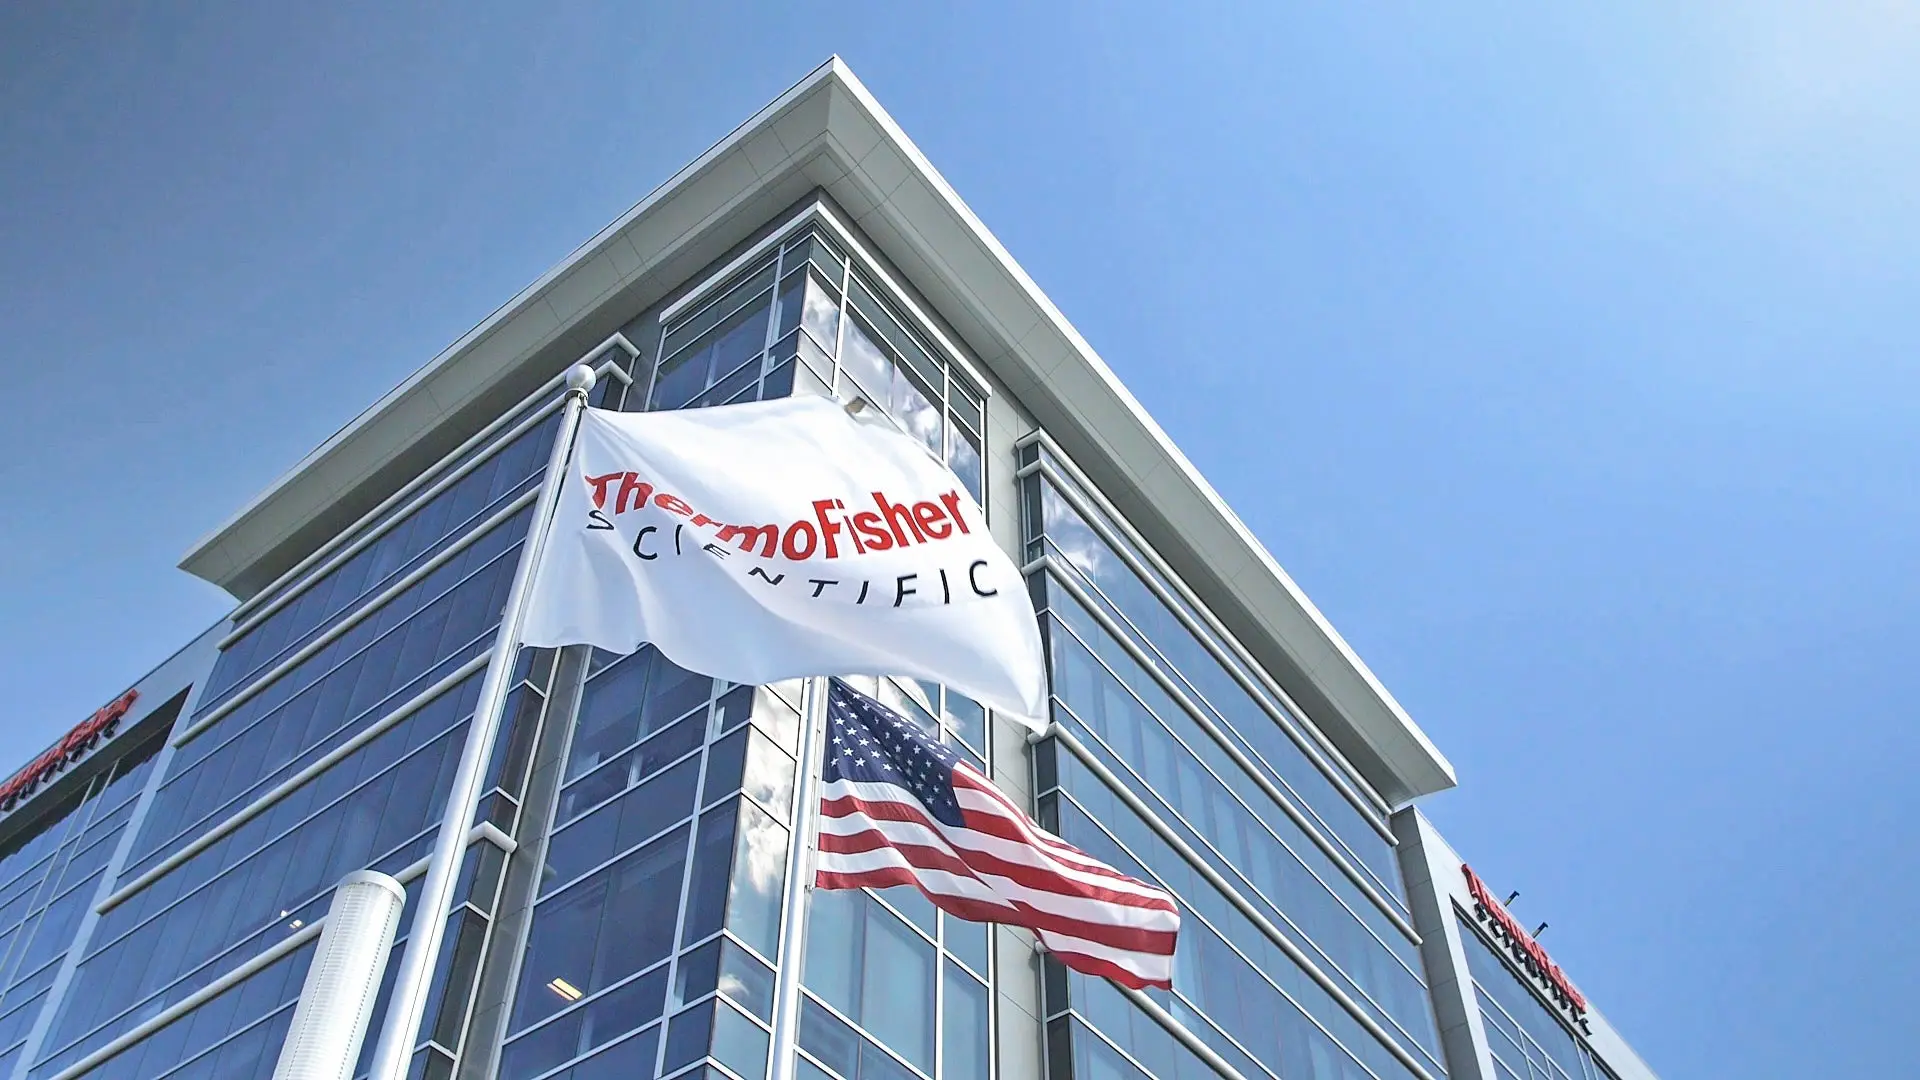 Outside of building with Thermo Fisher Scientific flag flying. 